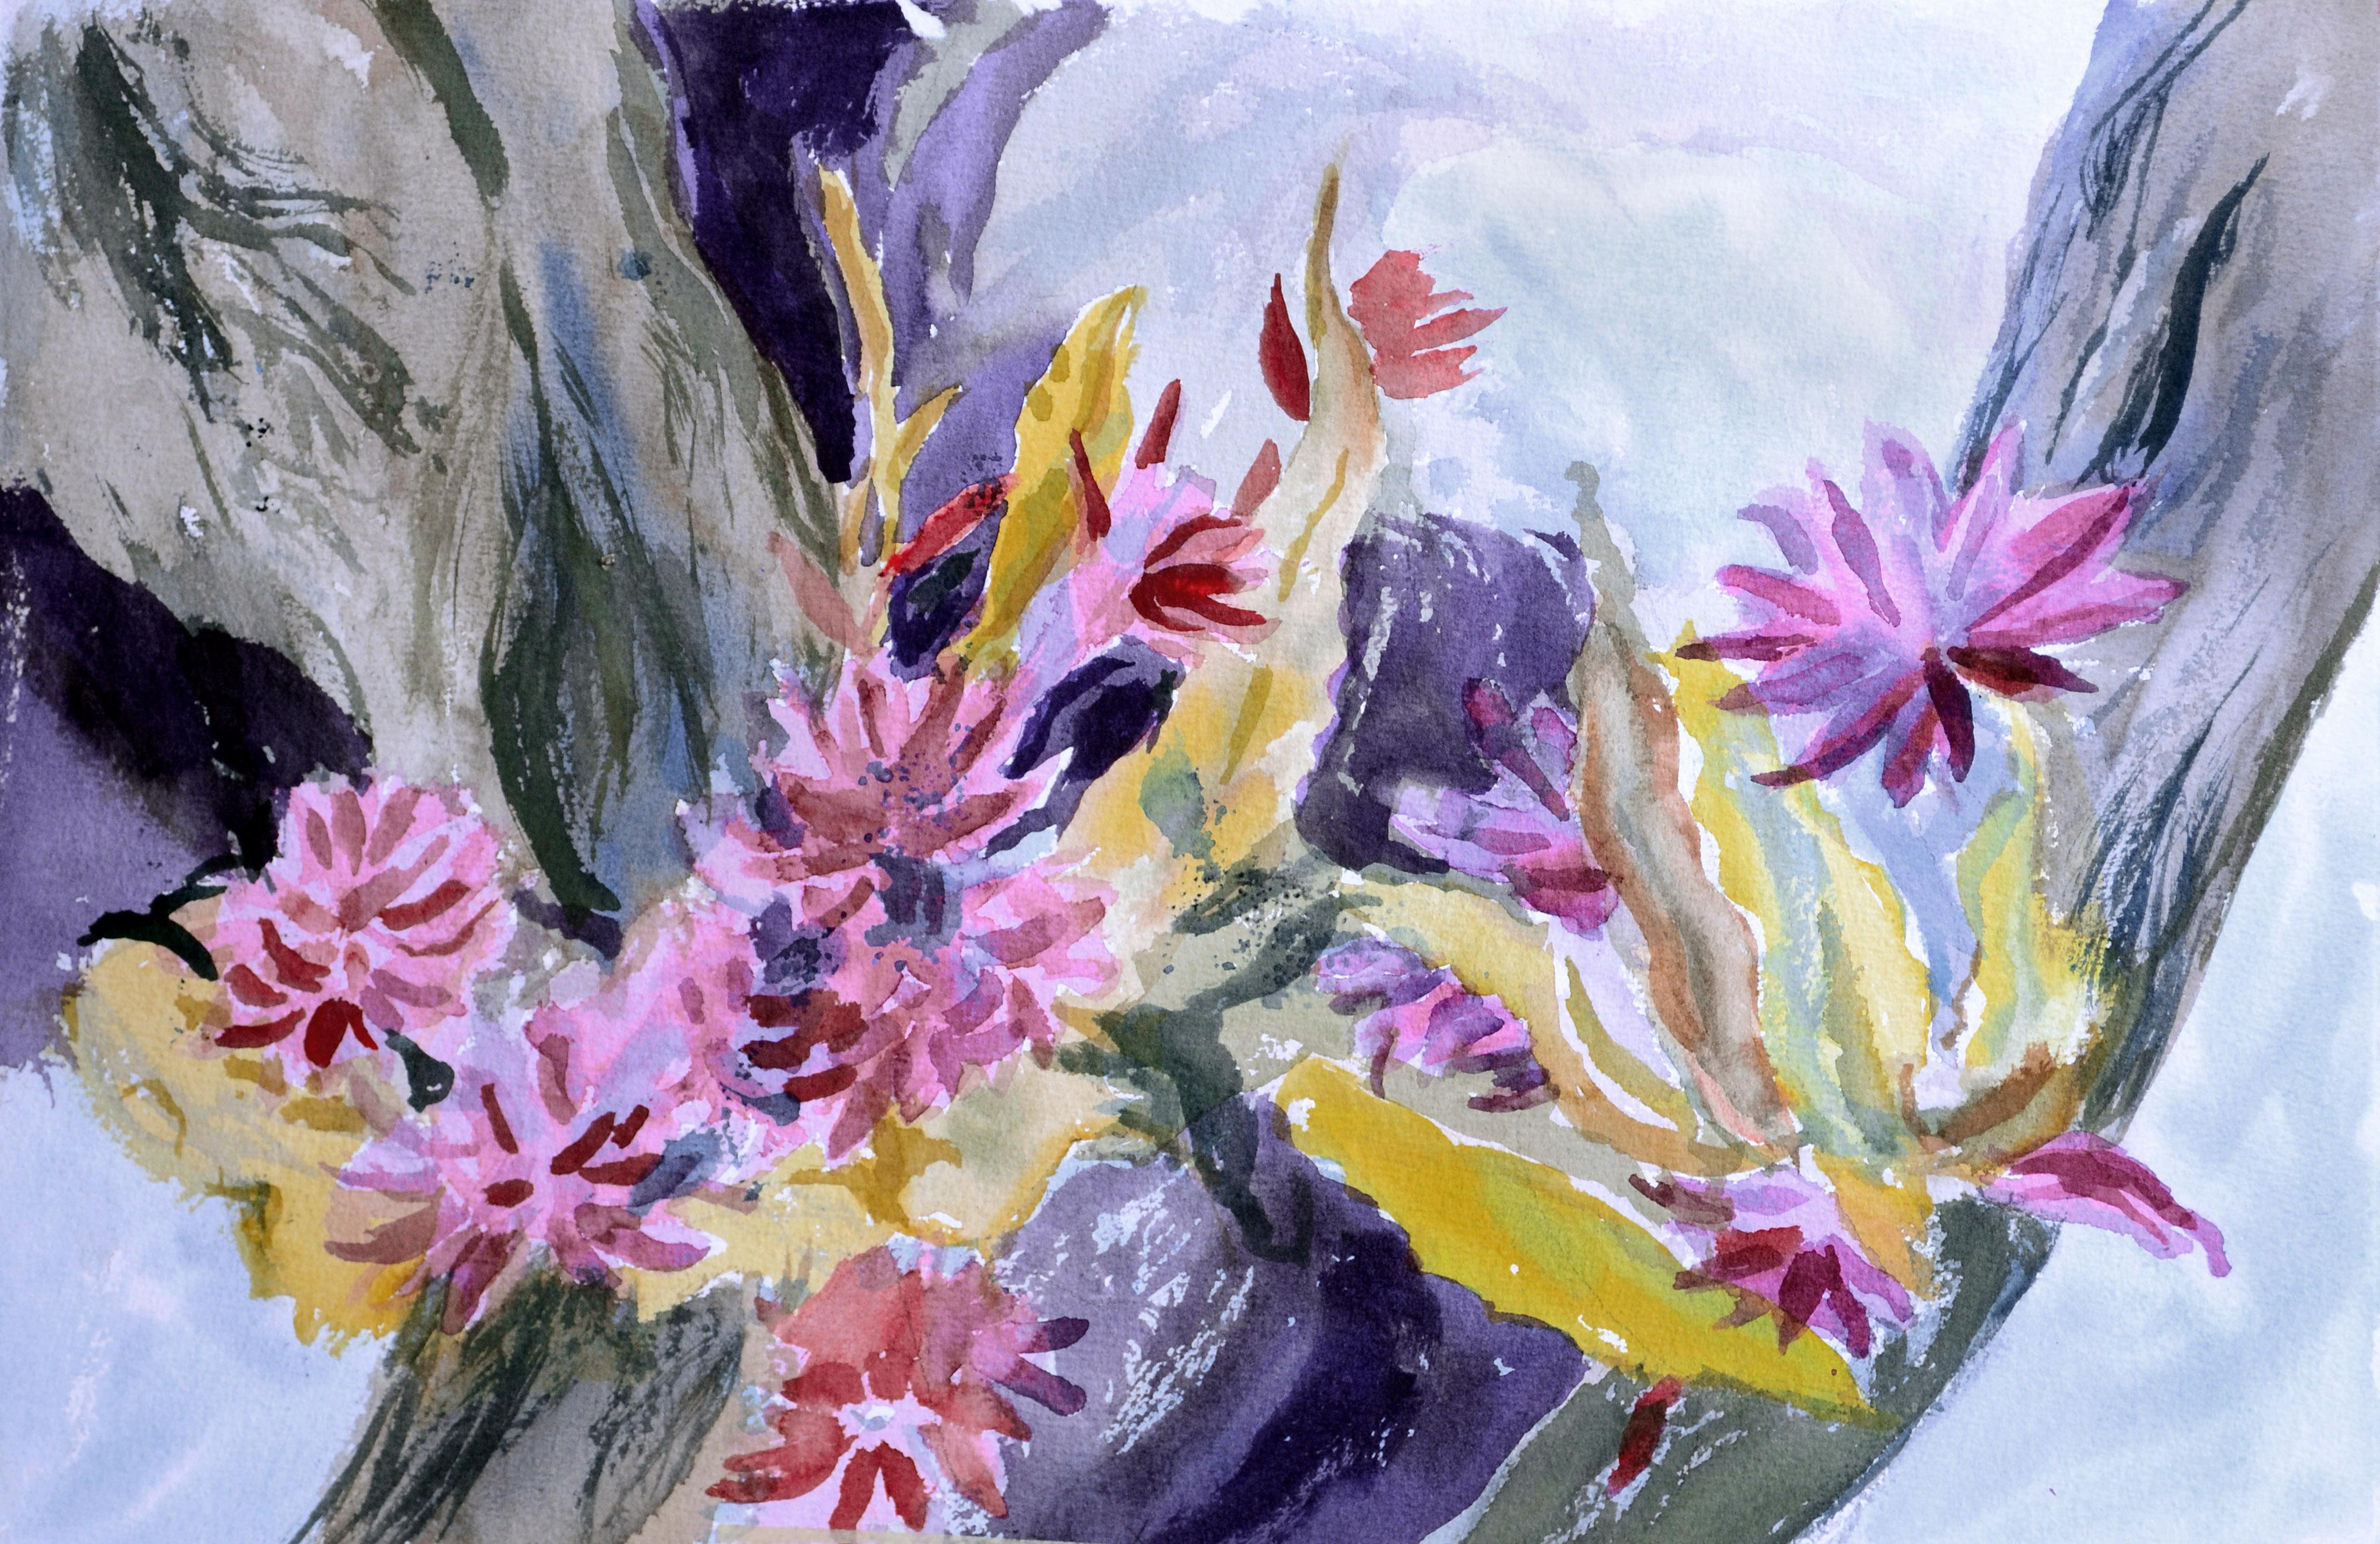 Les Anderson Abstract Drawing - Chrysanthemums & Colorful Abstract - Two Sided Watercolor